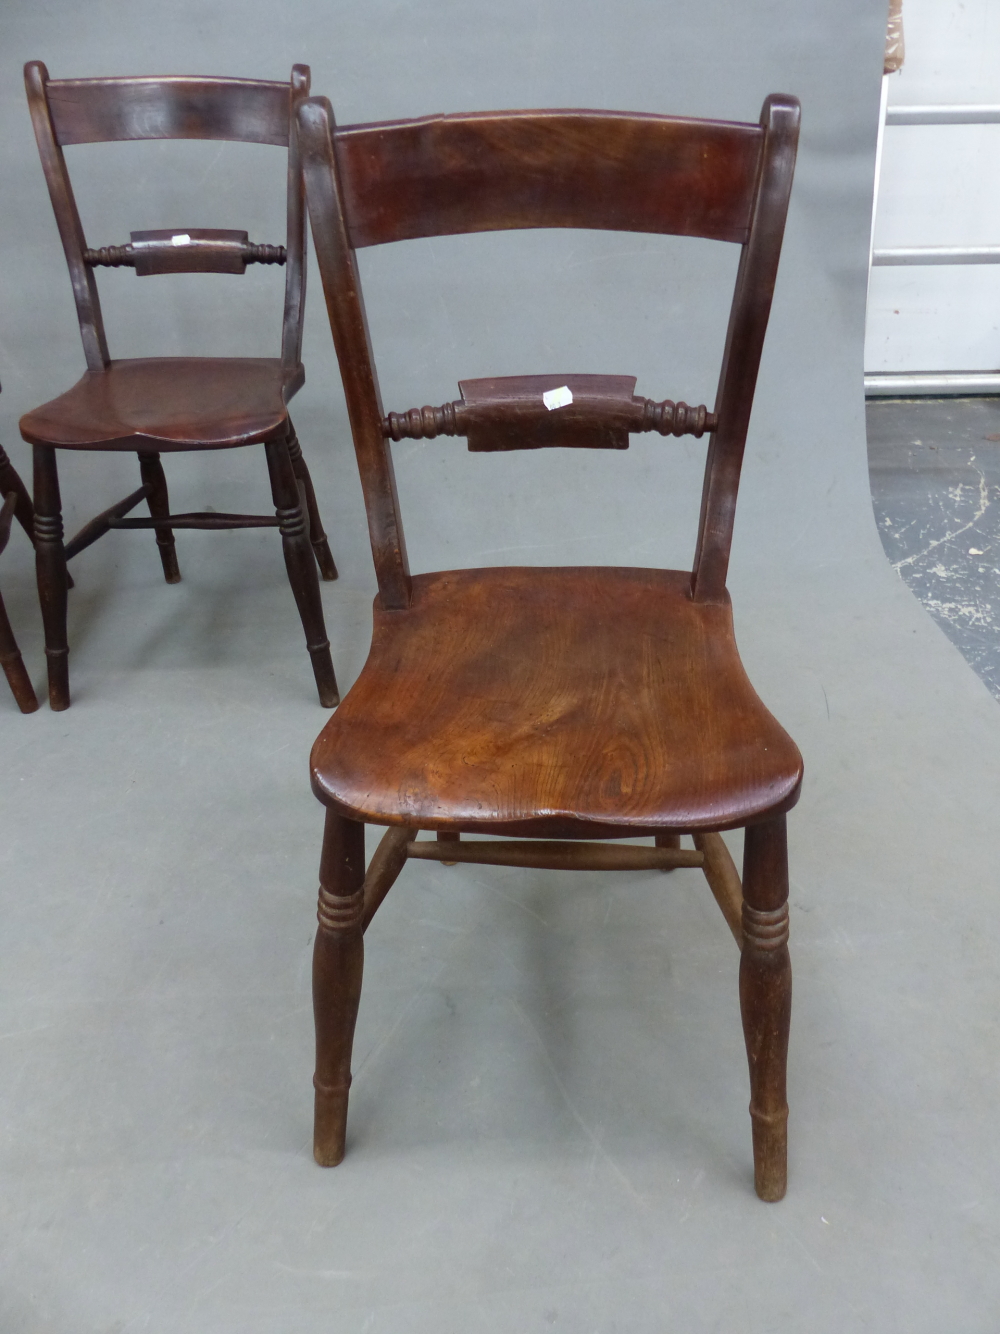 A SET OF FOUR ANTIQUE OXFORD CHAIRS WITH SADDLE SEATS AND RING TURNED BALUSTER LEGS - Image 2 of 7